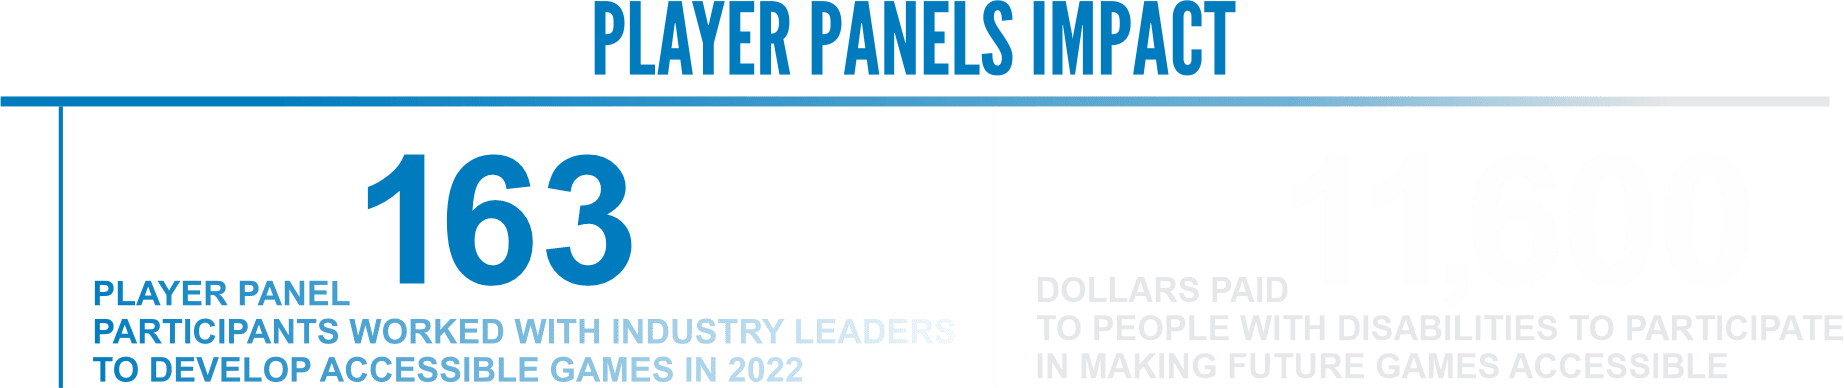 text that says 'Player Panels Impact, 163 player panel participants worked with industry leaders to develop accessible games in 2022. 11,600 dollars paid to people with disabilities to participate in making future games accessible.' 